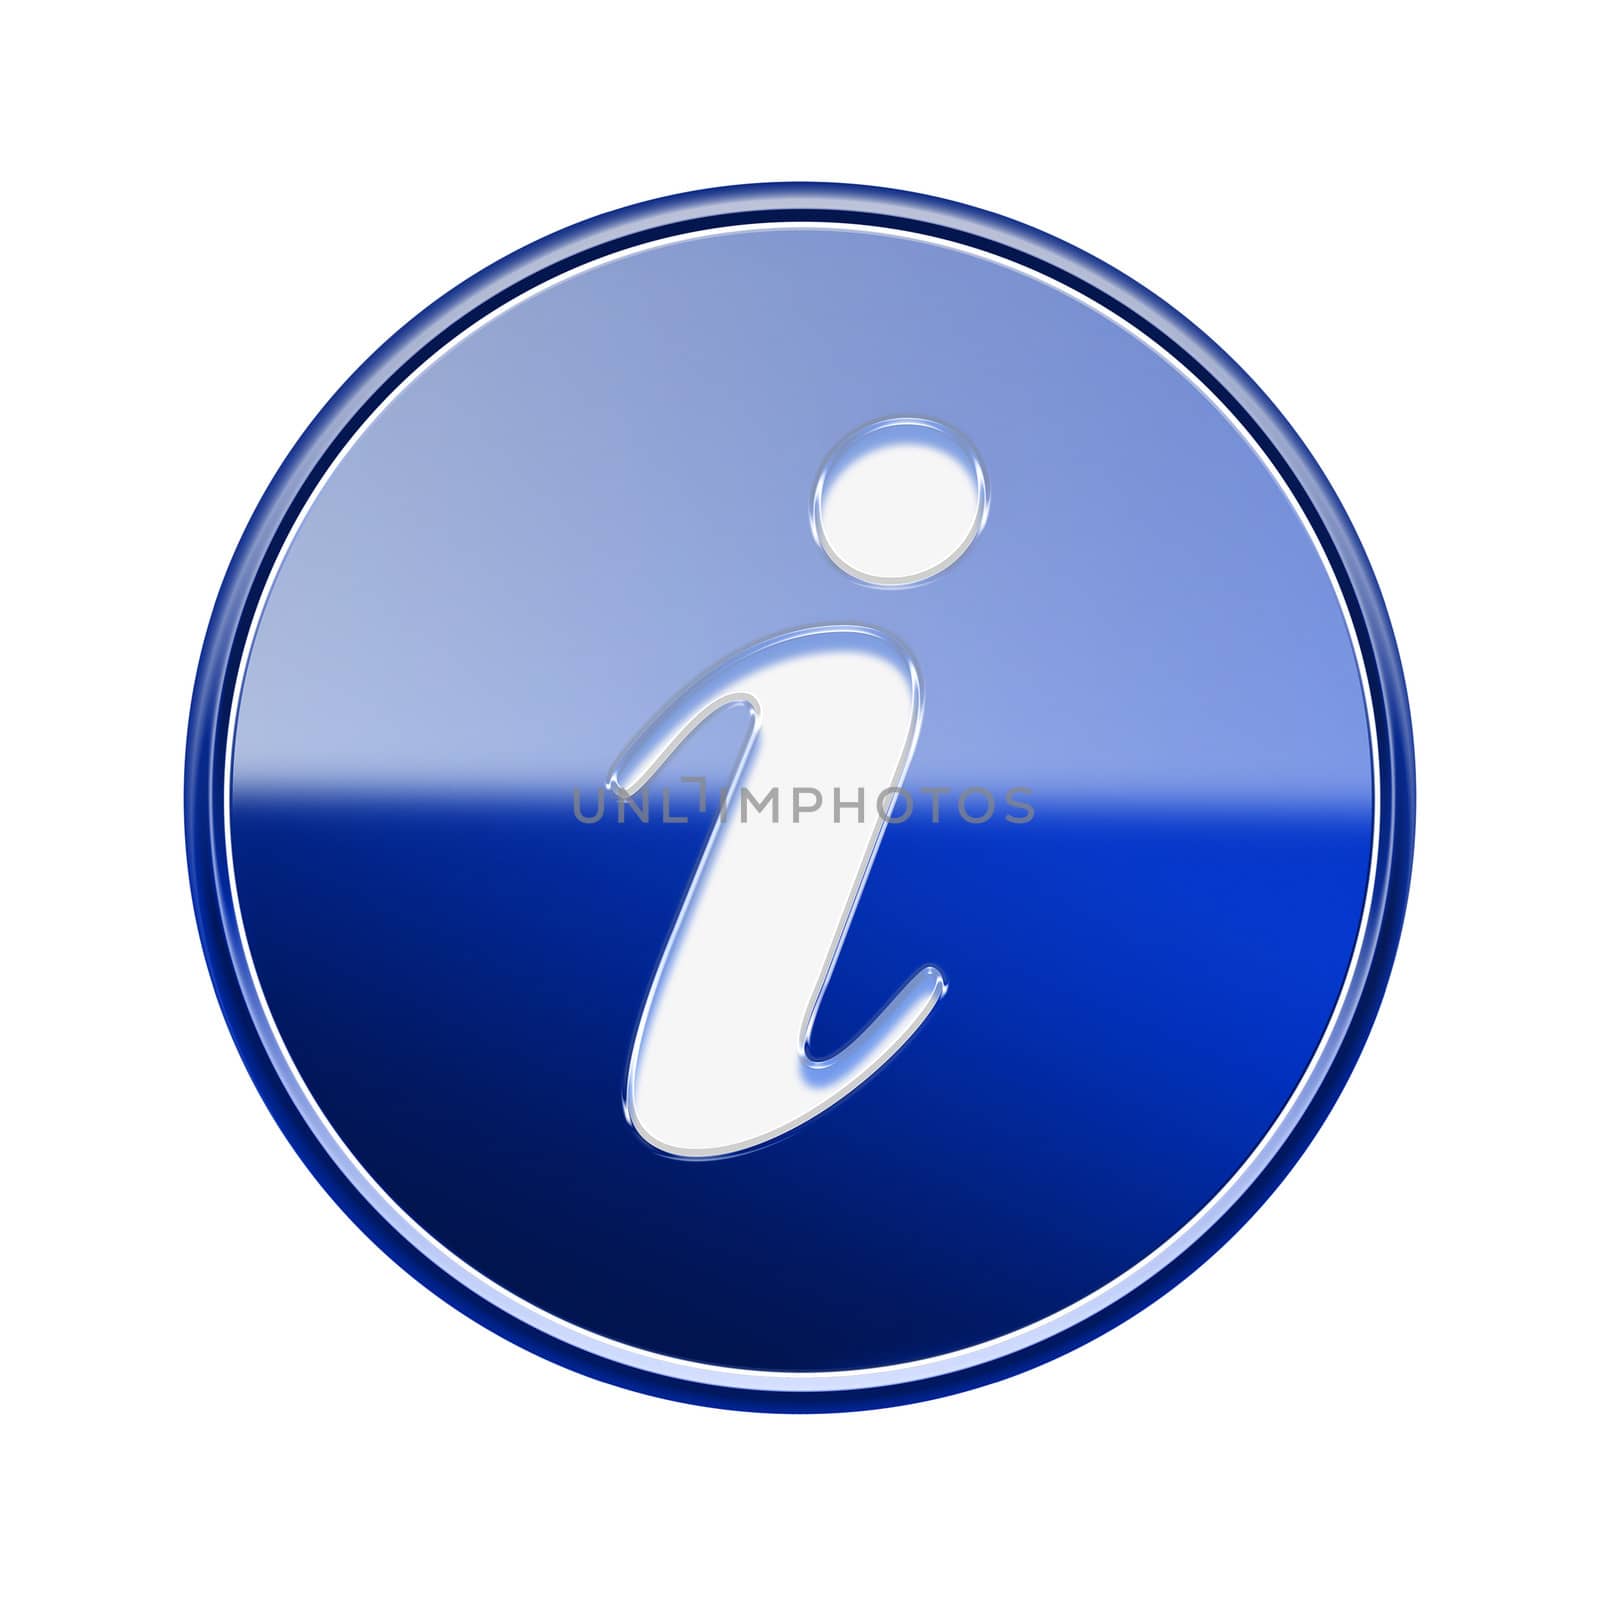 Information icon glossy blue, isolated on white background